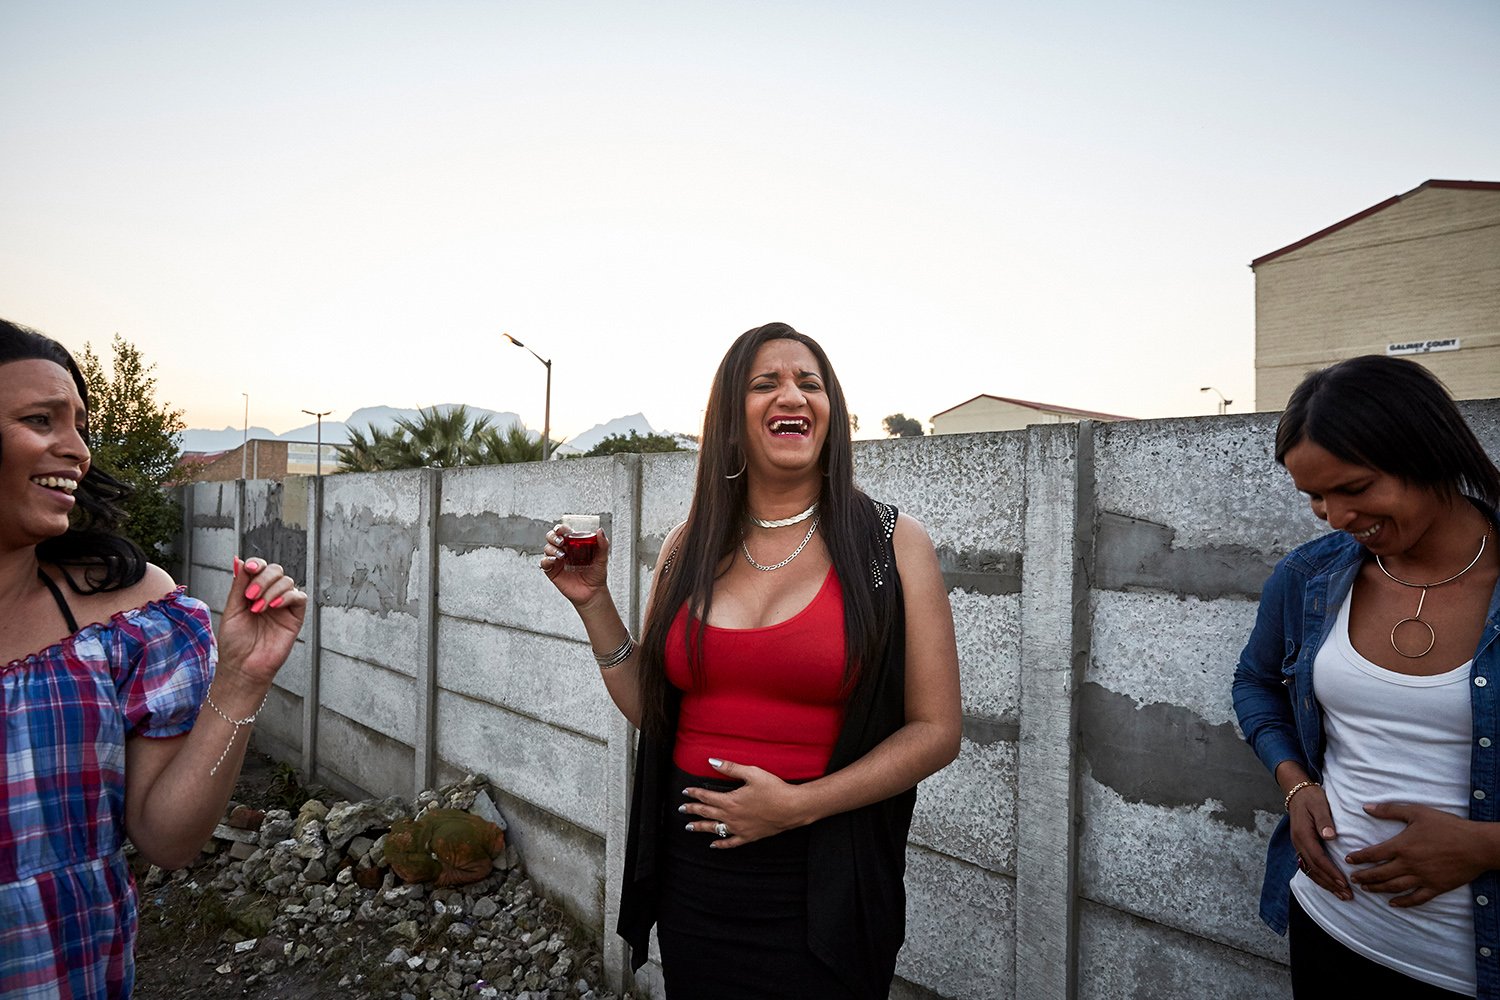  From left to right: Mortavia, Chedino and Wilma share a joke in the courtyard of the home she shares with Keagan and his parents, Hannover Park, Cape Town, 2018.  